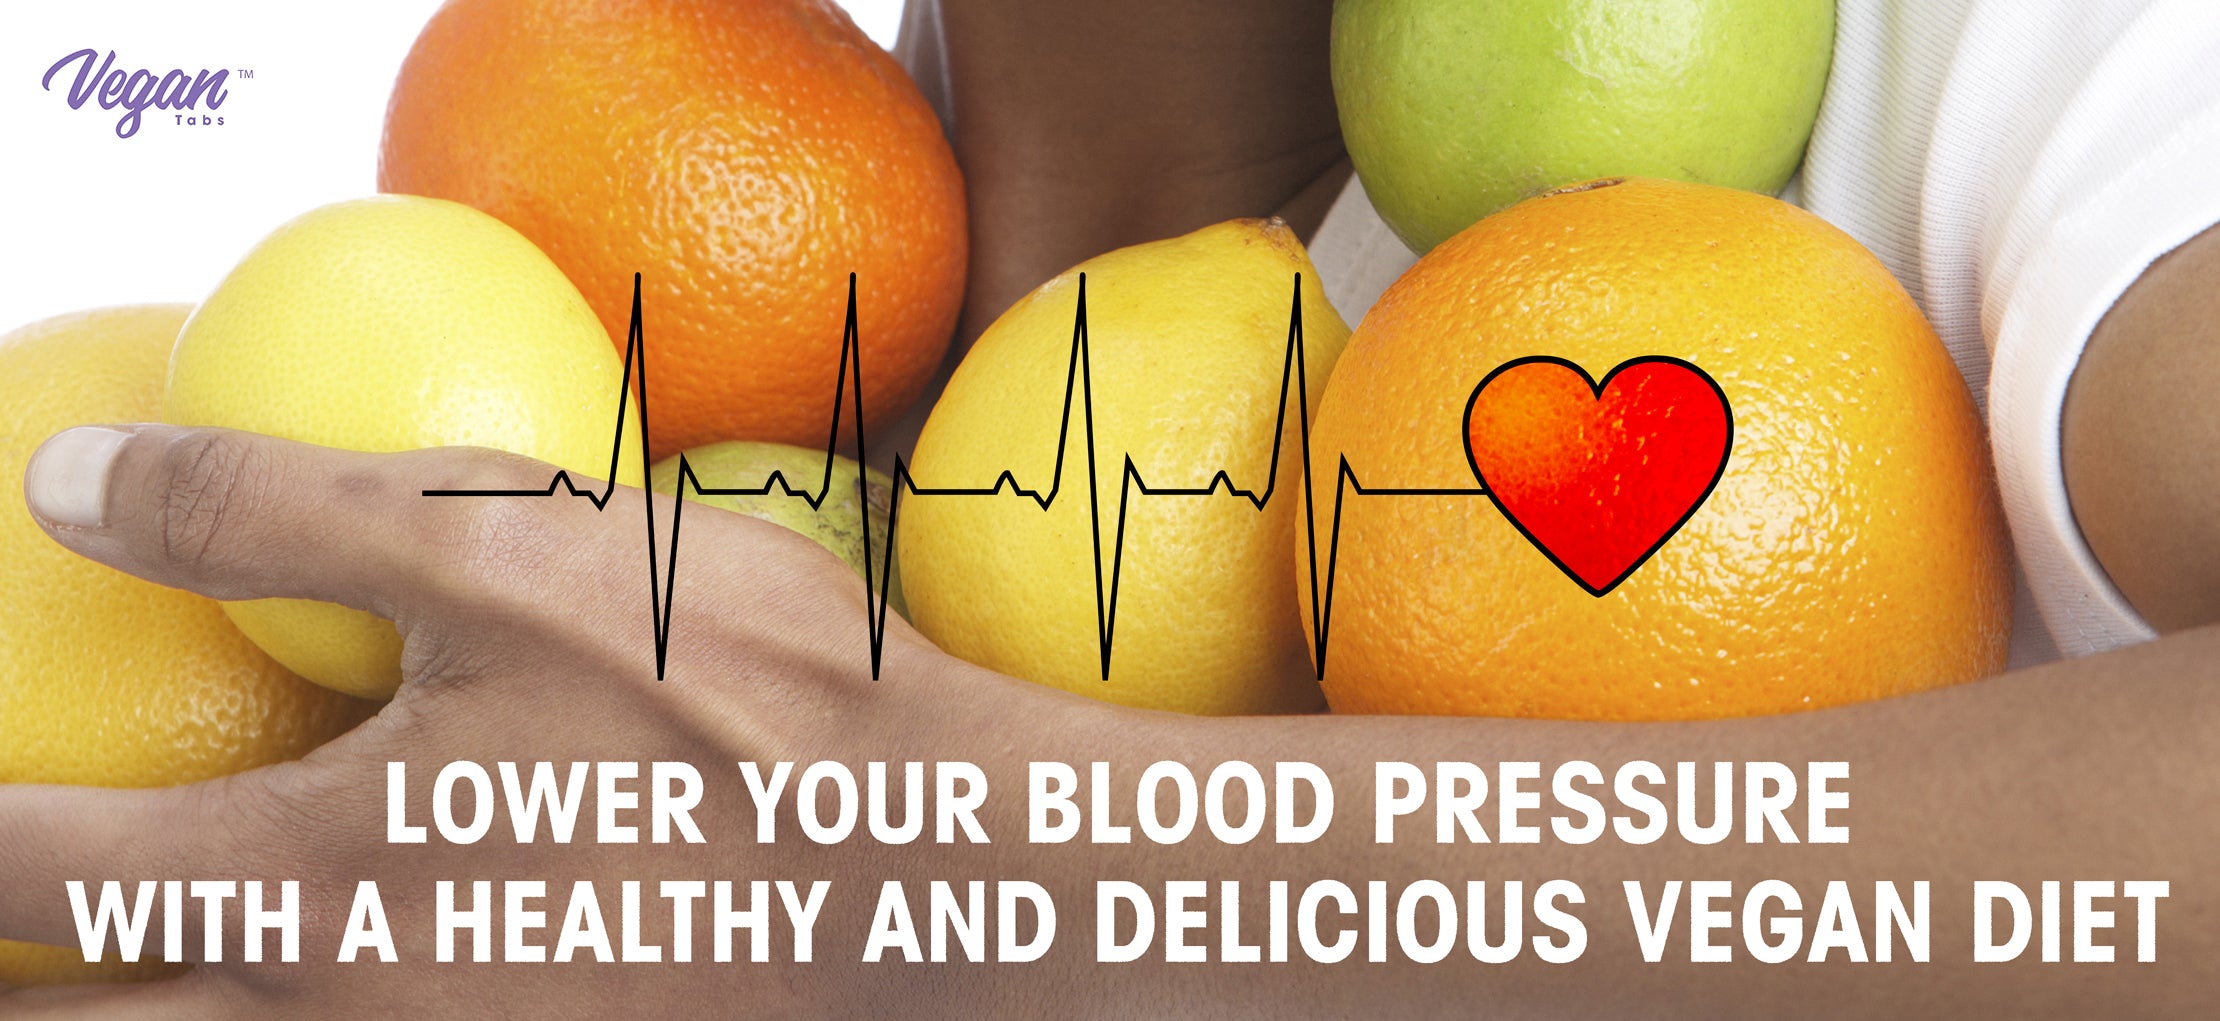 Lower your blood pressure with a healthy and delicious vegan diet